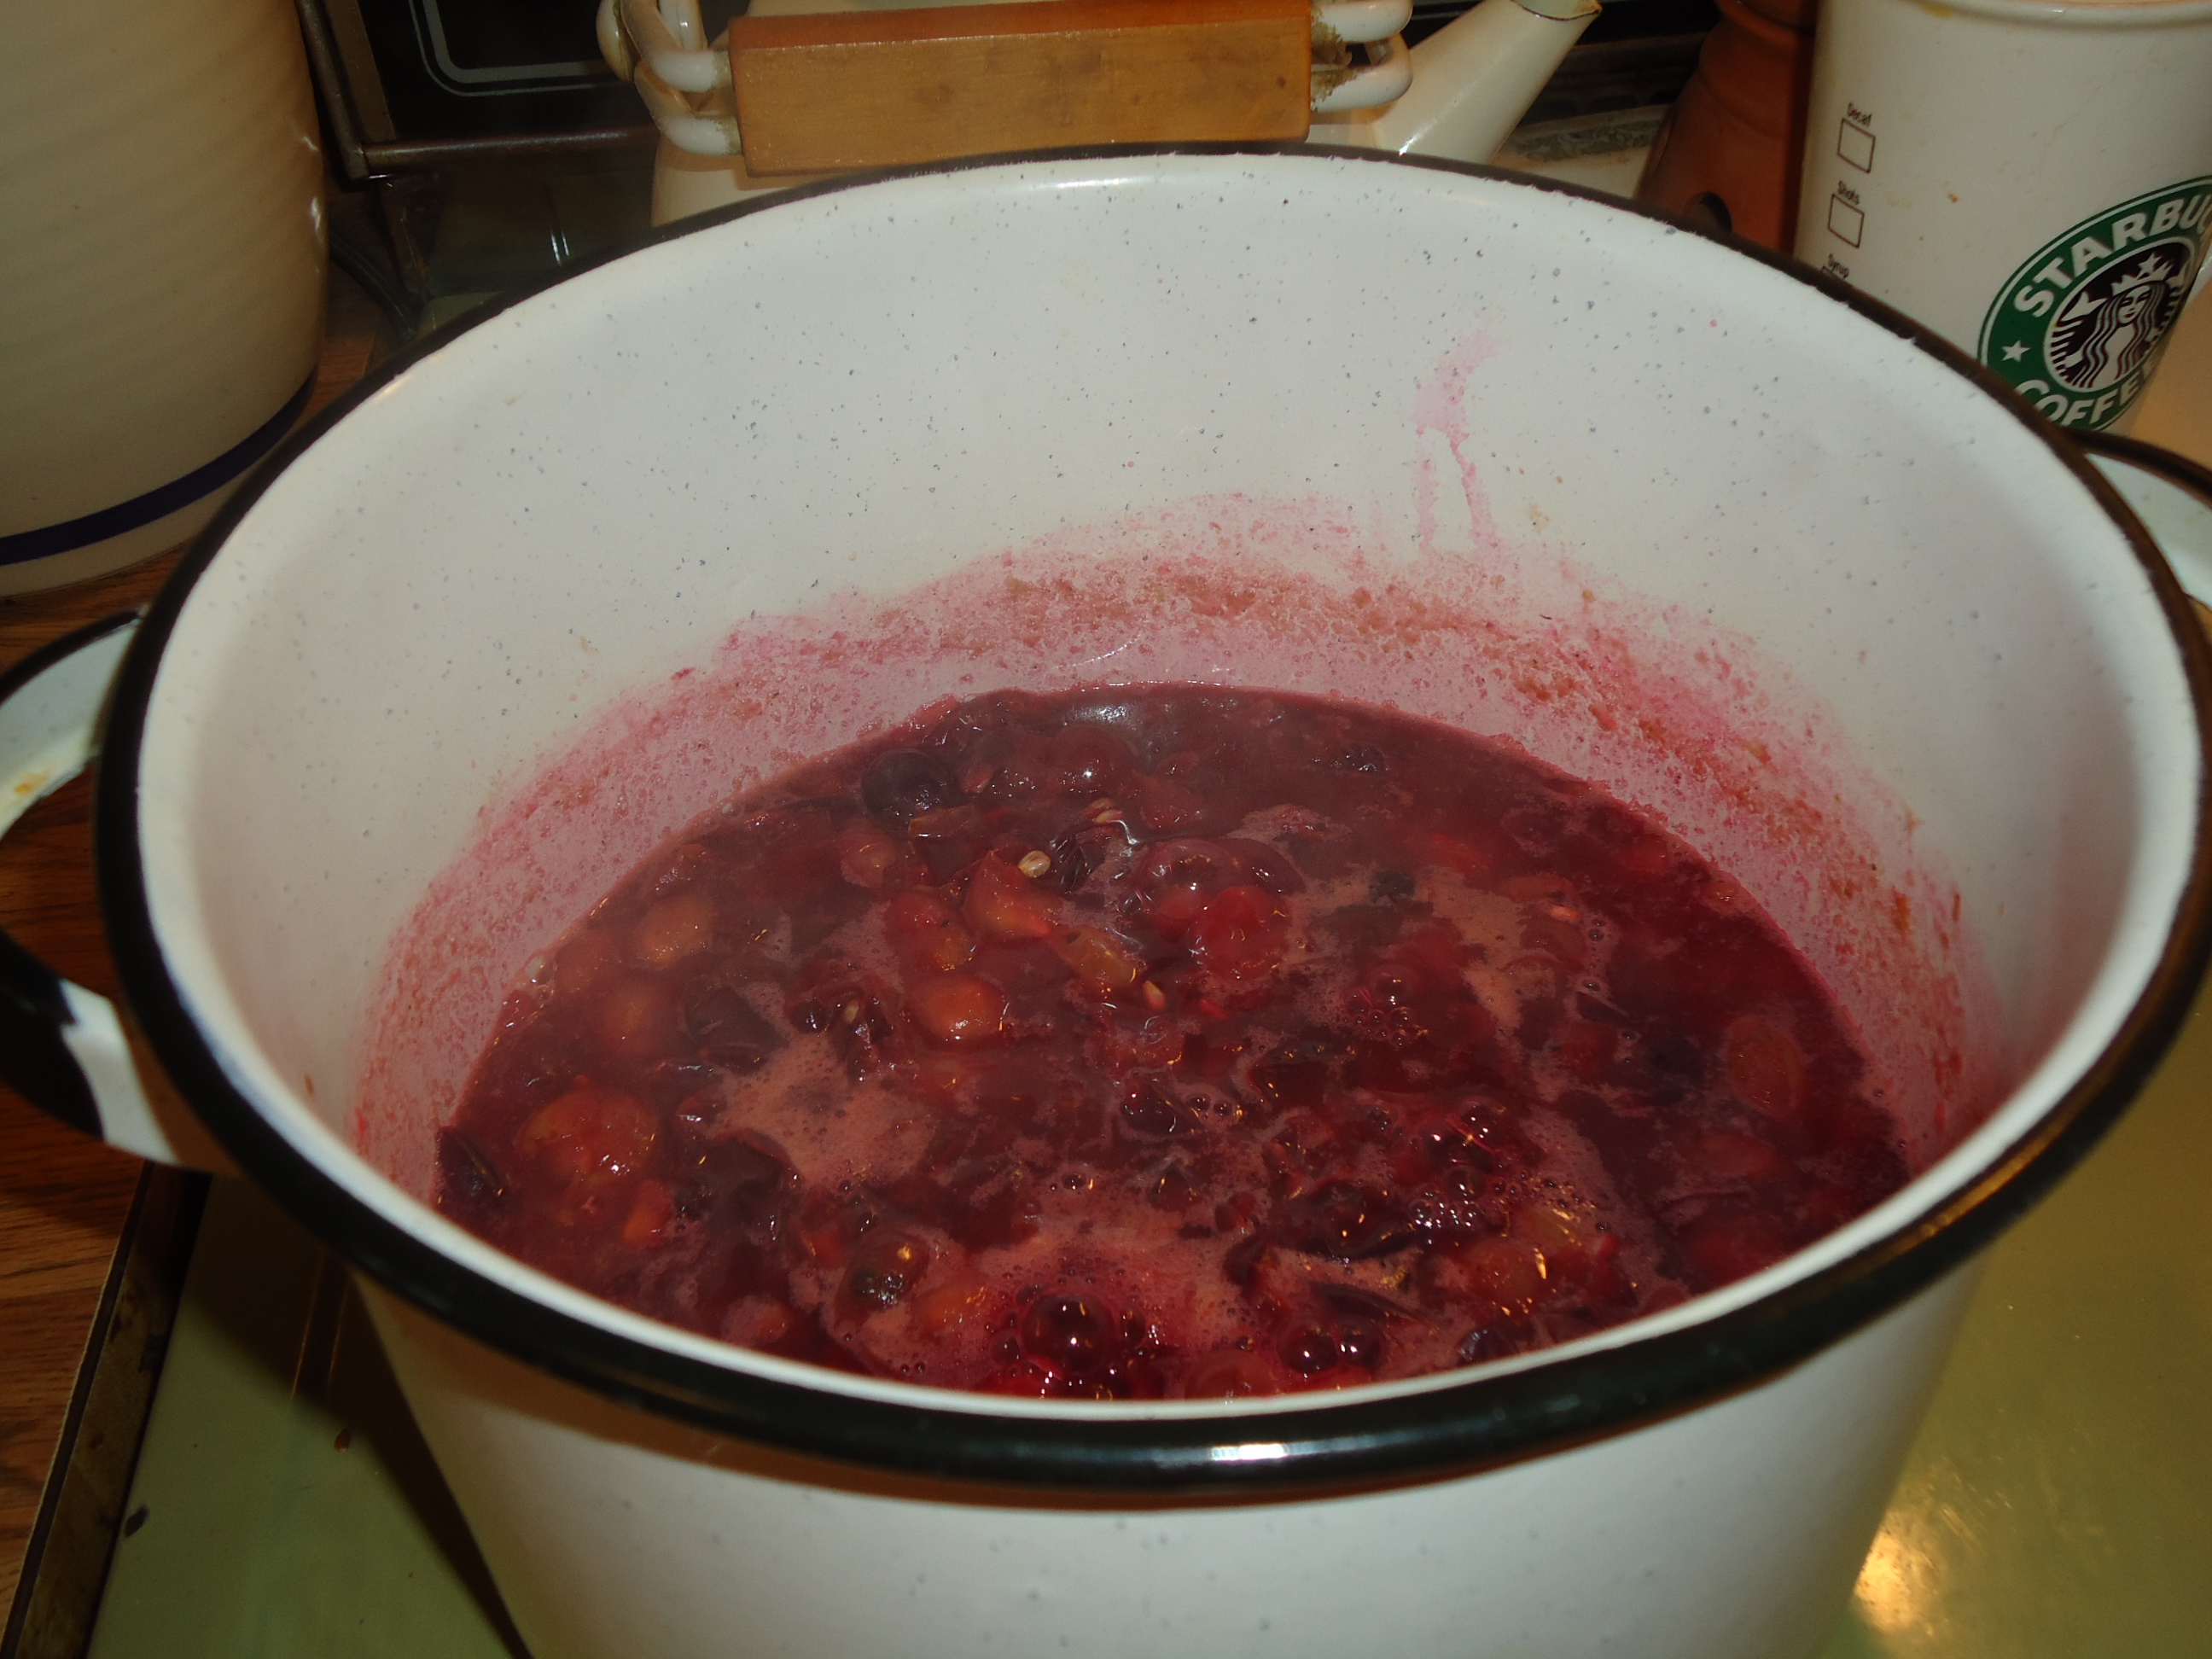 Pot of jam boiling on stove photo